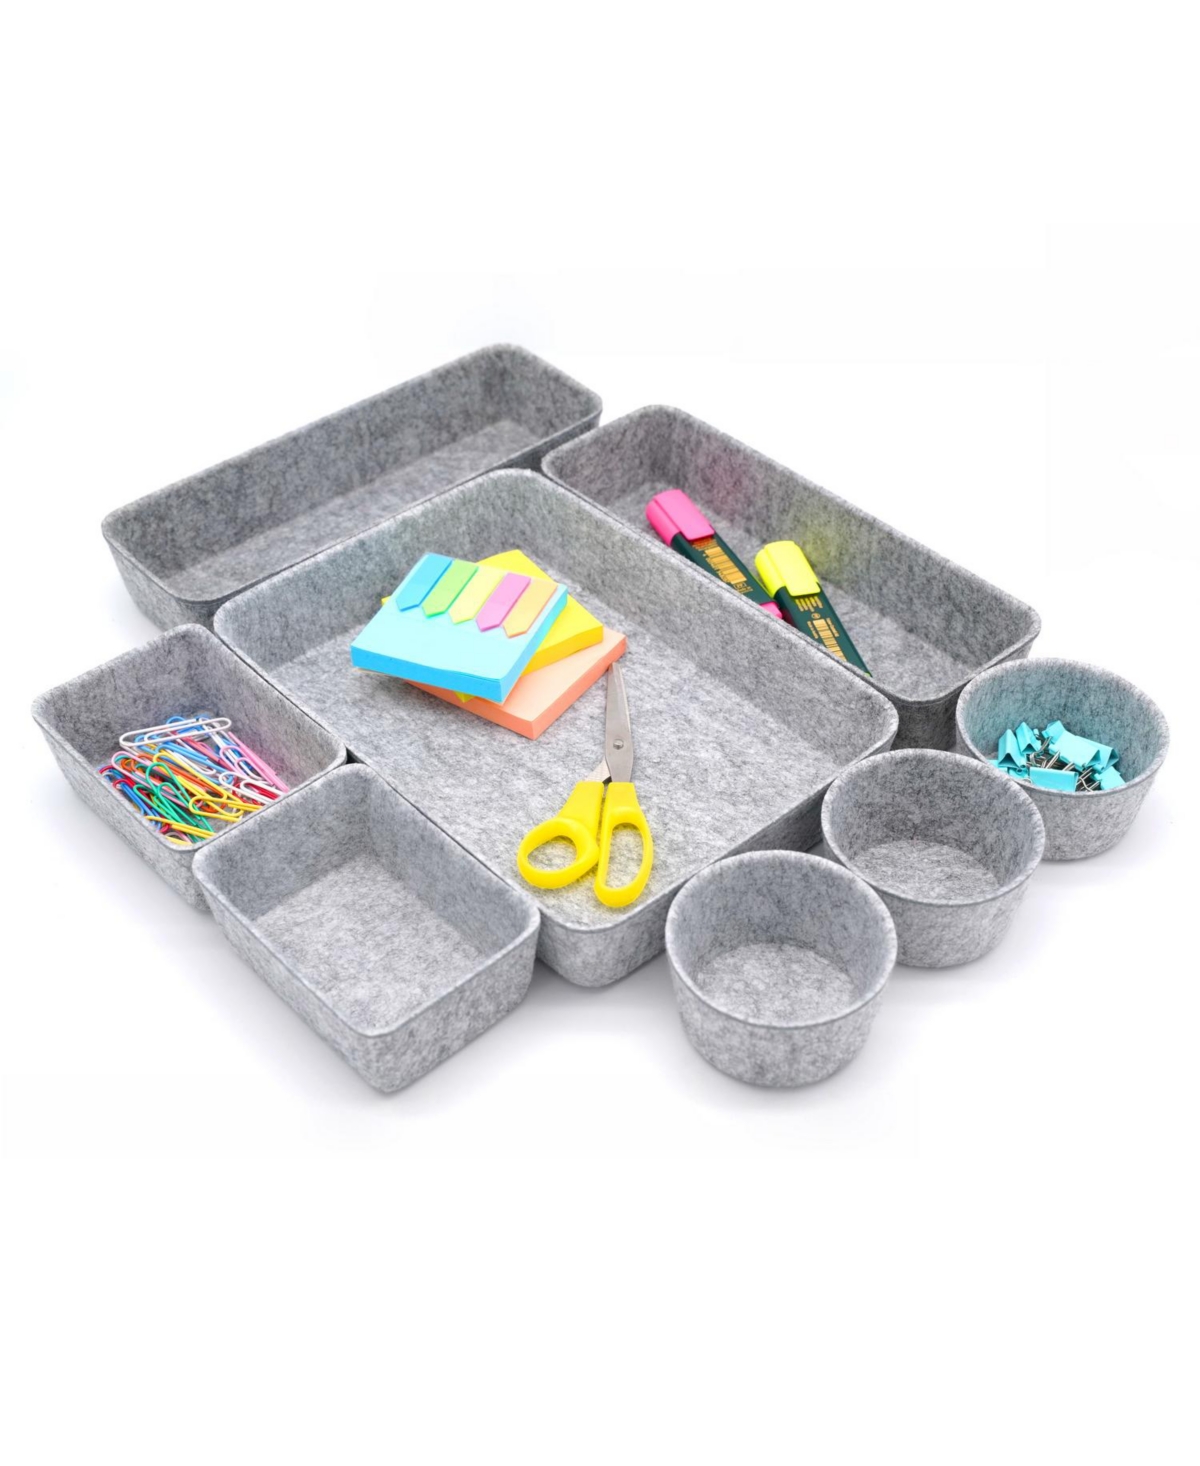 8 Piece Felt Drawer Organizer Set with Round Cups and Trays - Gray